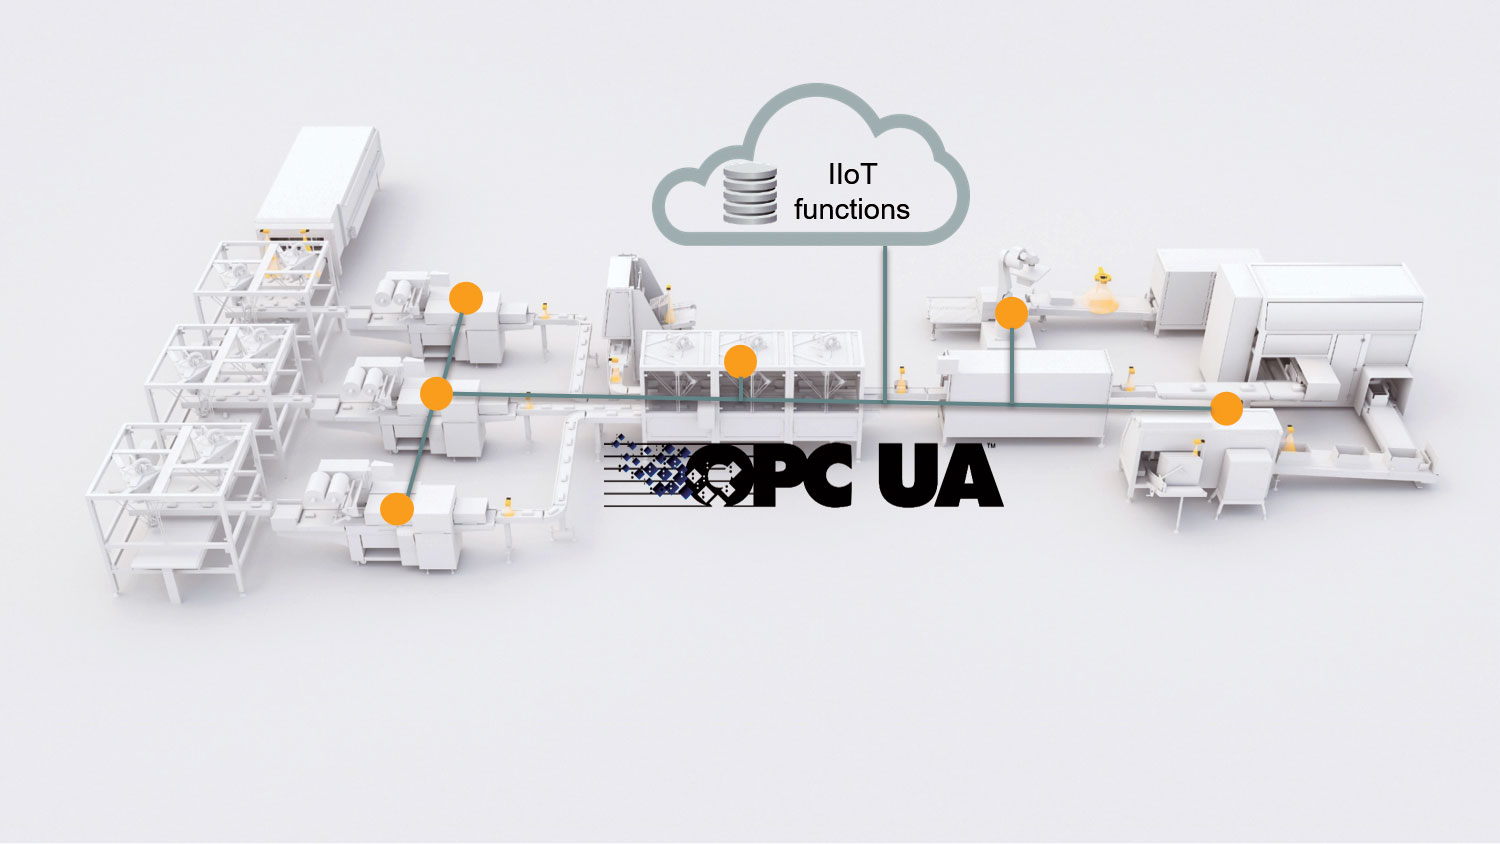 The OPC UA Cloud Solution for Machine and Plant Automation